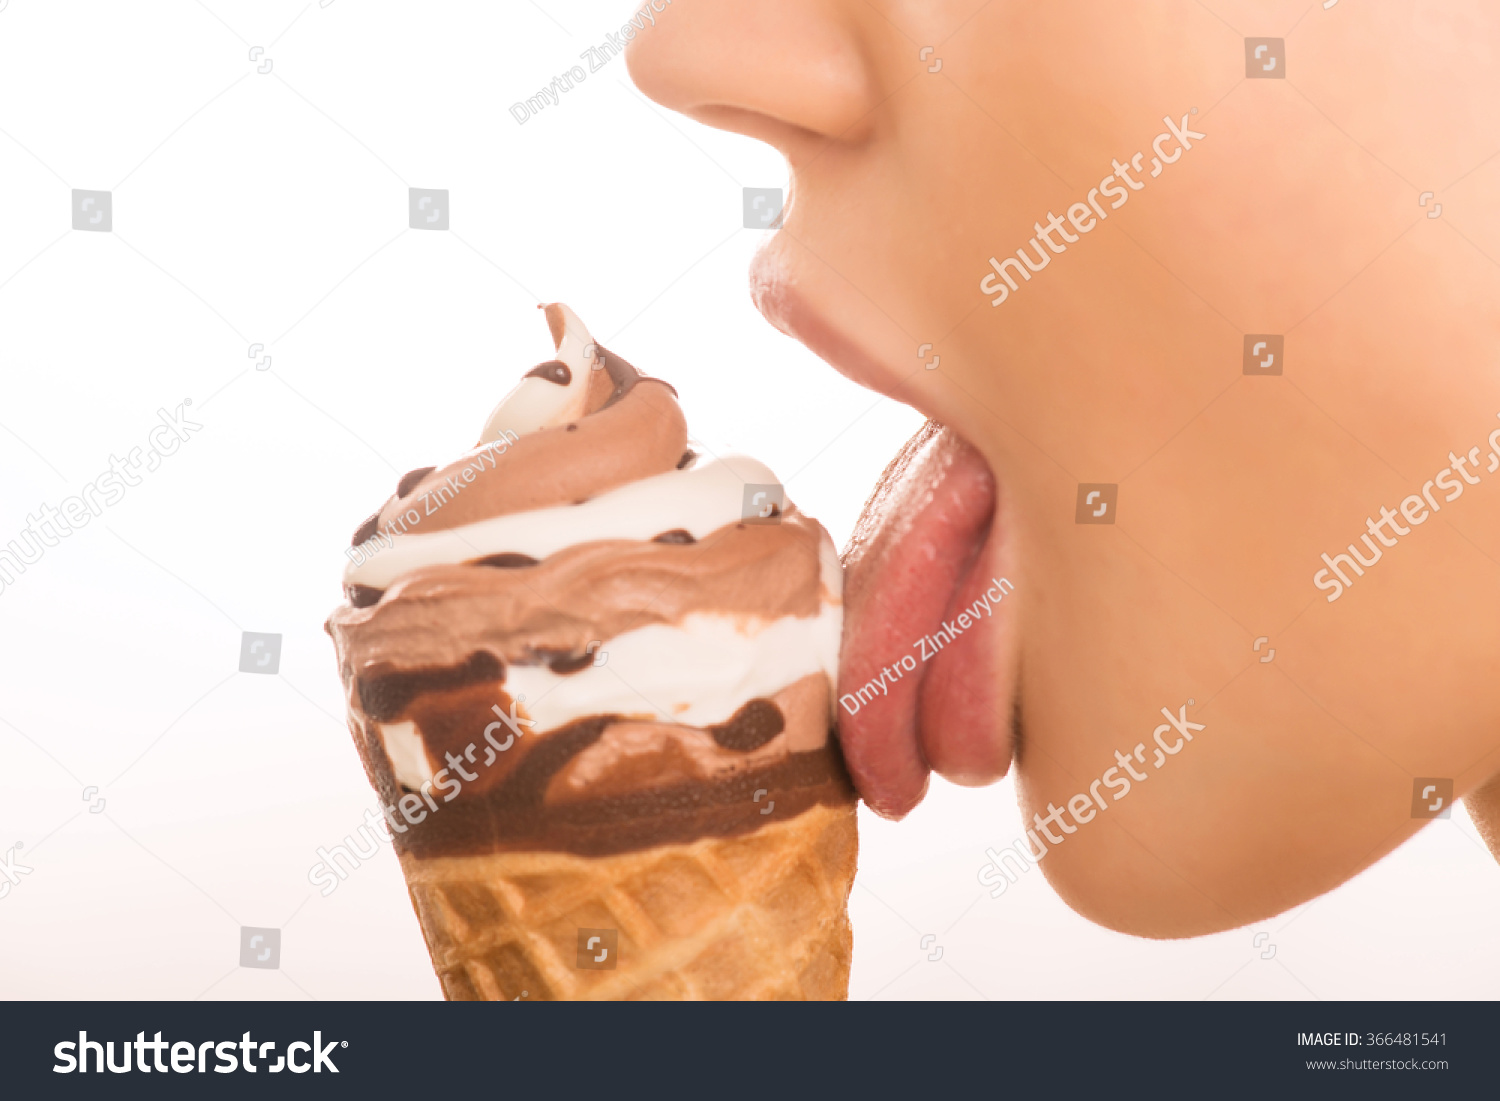 Girls lick whip cream each pictures